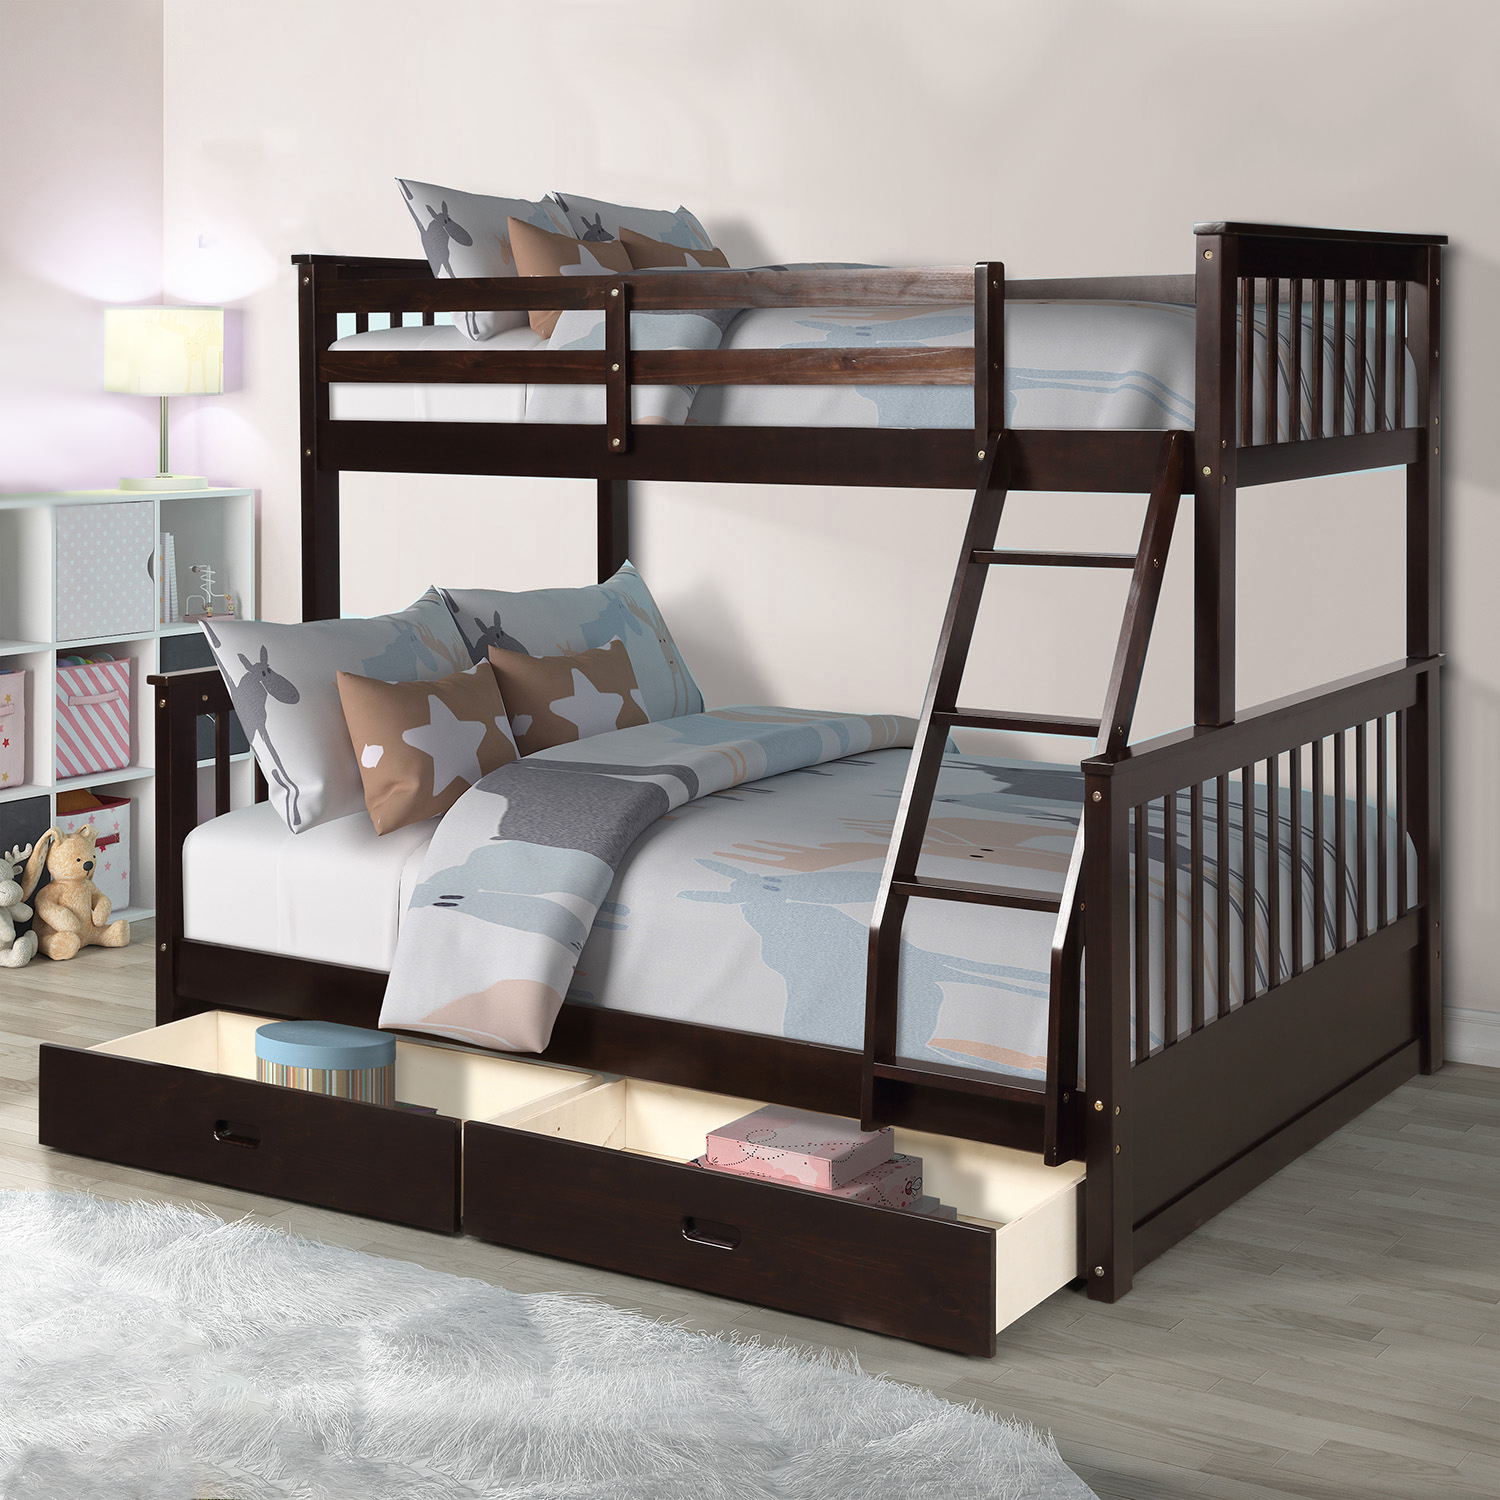 Wood Bunk Beds Twin Over Full, Wood And Metal Bunk Beds